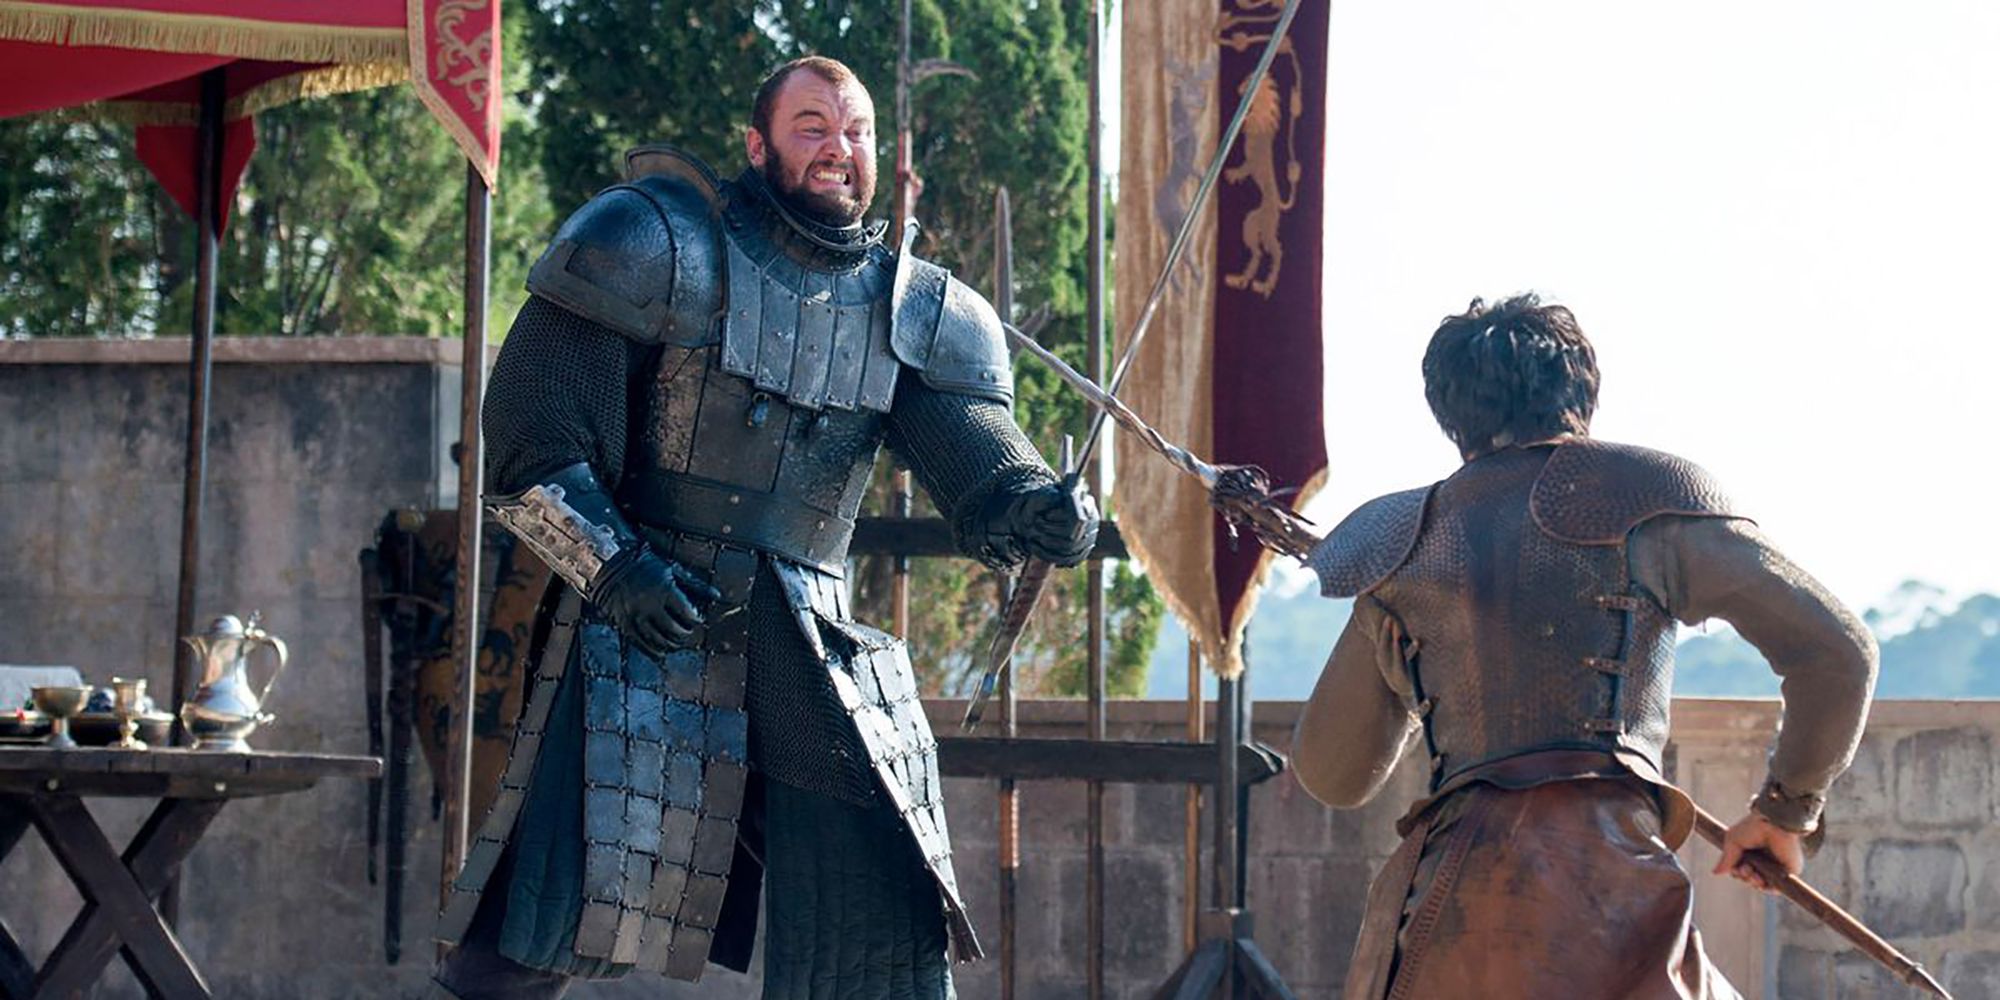 The Mountain duels Oberyn Martell in Game of Thrones.